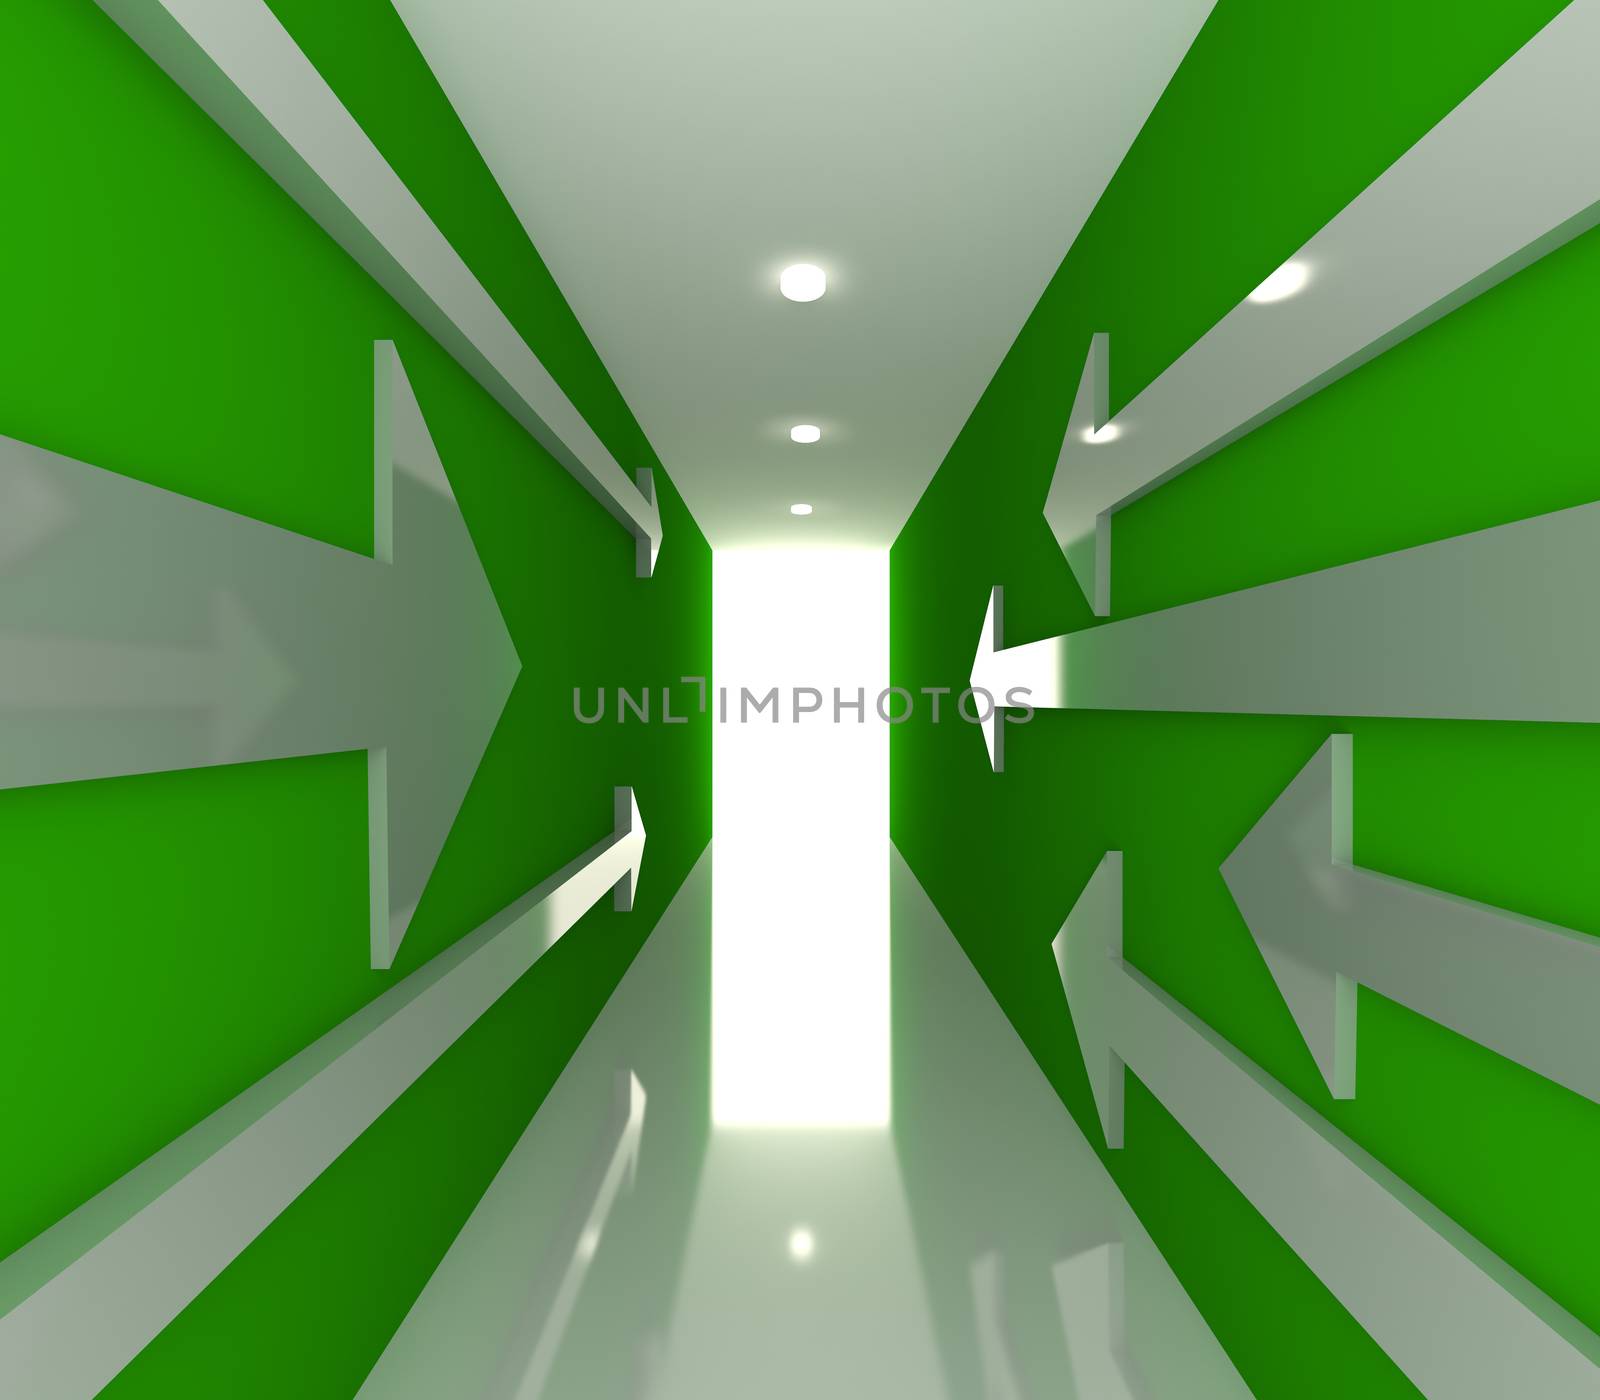 Green Empty Room With Arrow shot to the Target. Business Concept